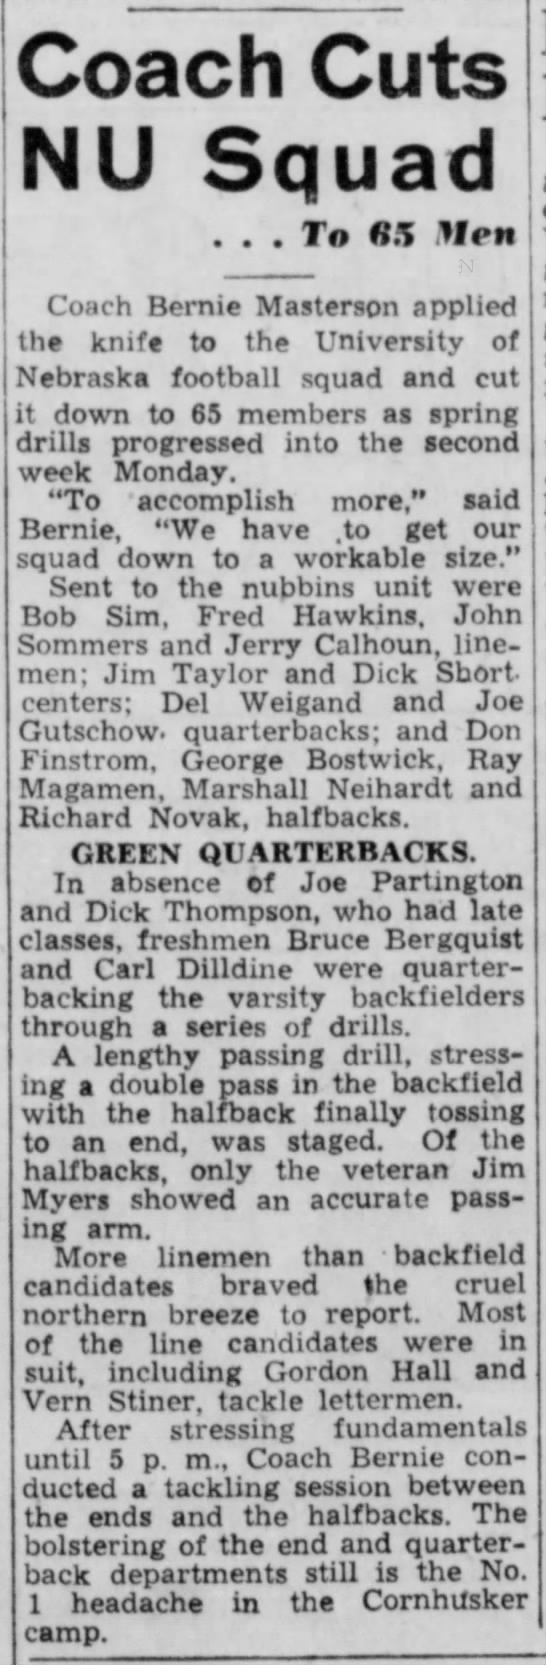 1947 spring roster cuts - 